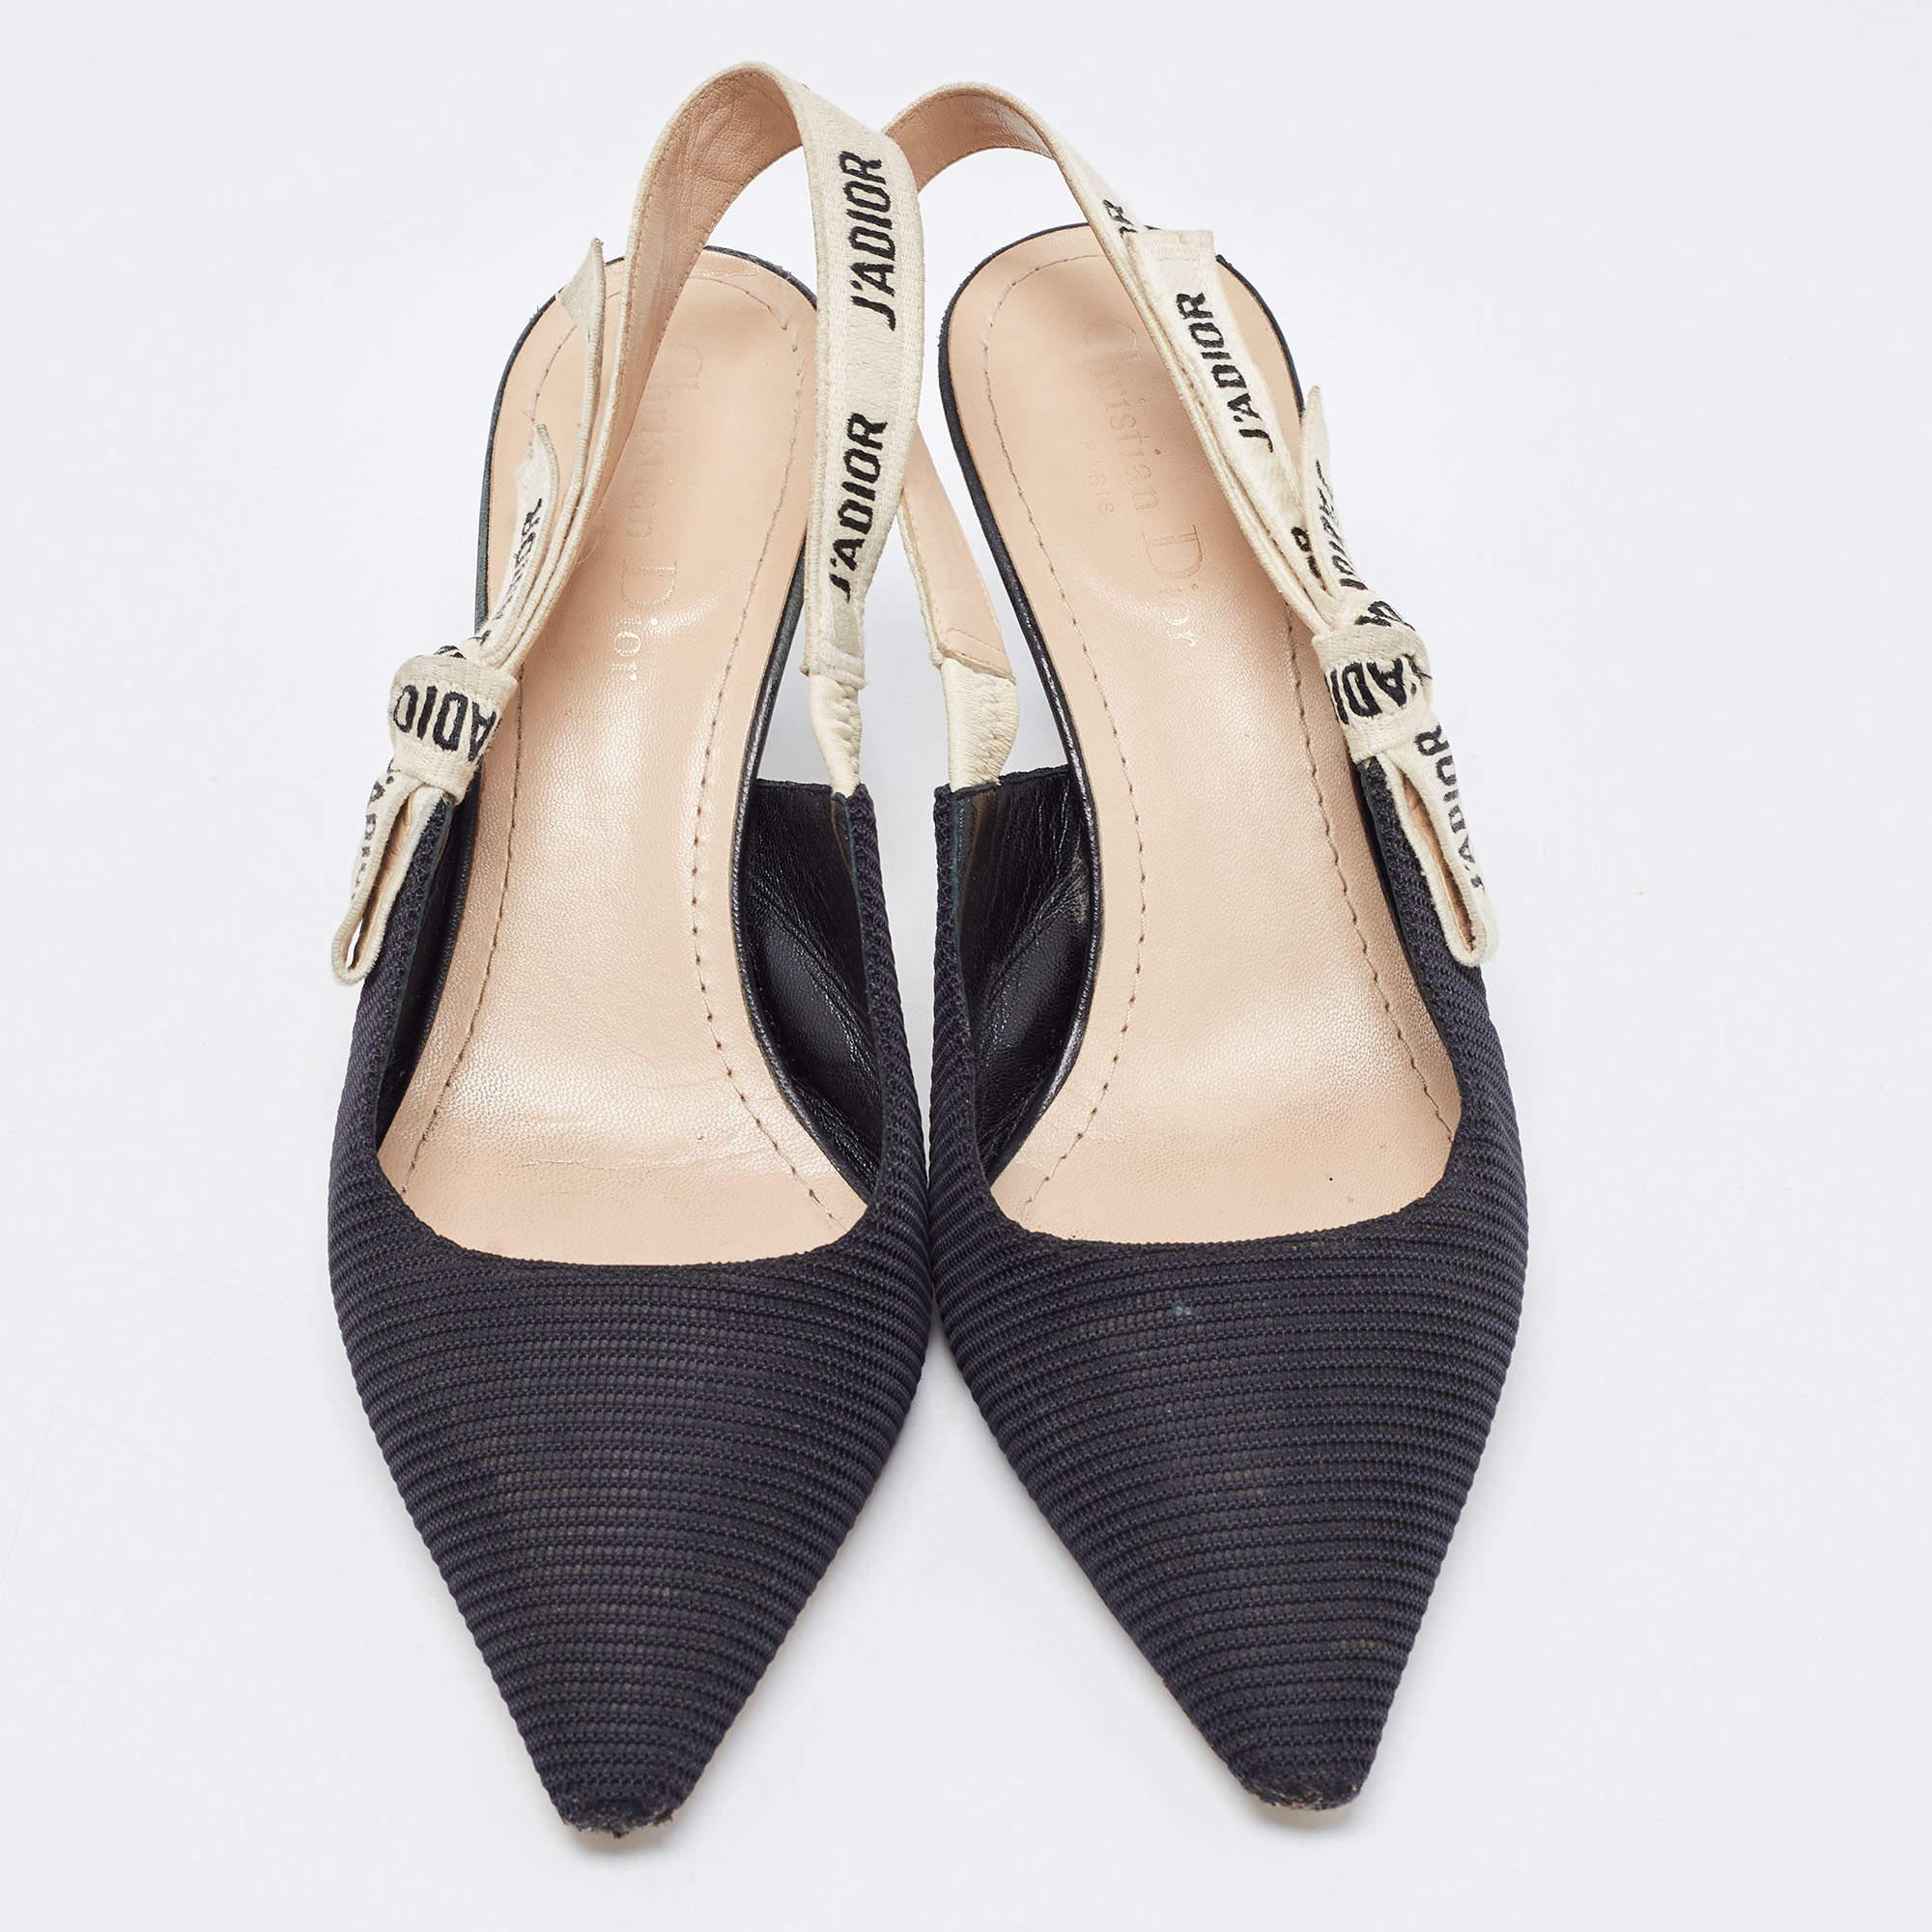 These popular J'Adior pumps exude an elegant and sophisticated aesthetic. Crafted from mesh & leather in a black shade, the pumps have a sleek pointed-toe design. Adorned with 'J'Adior' slingbacks and 8 cm heels, these exceptional beauties are a